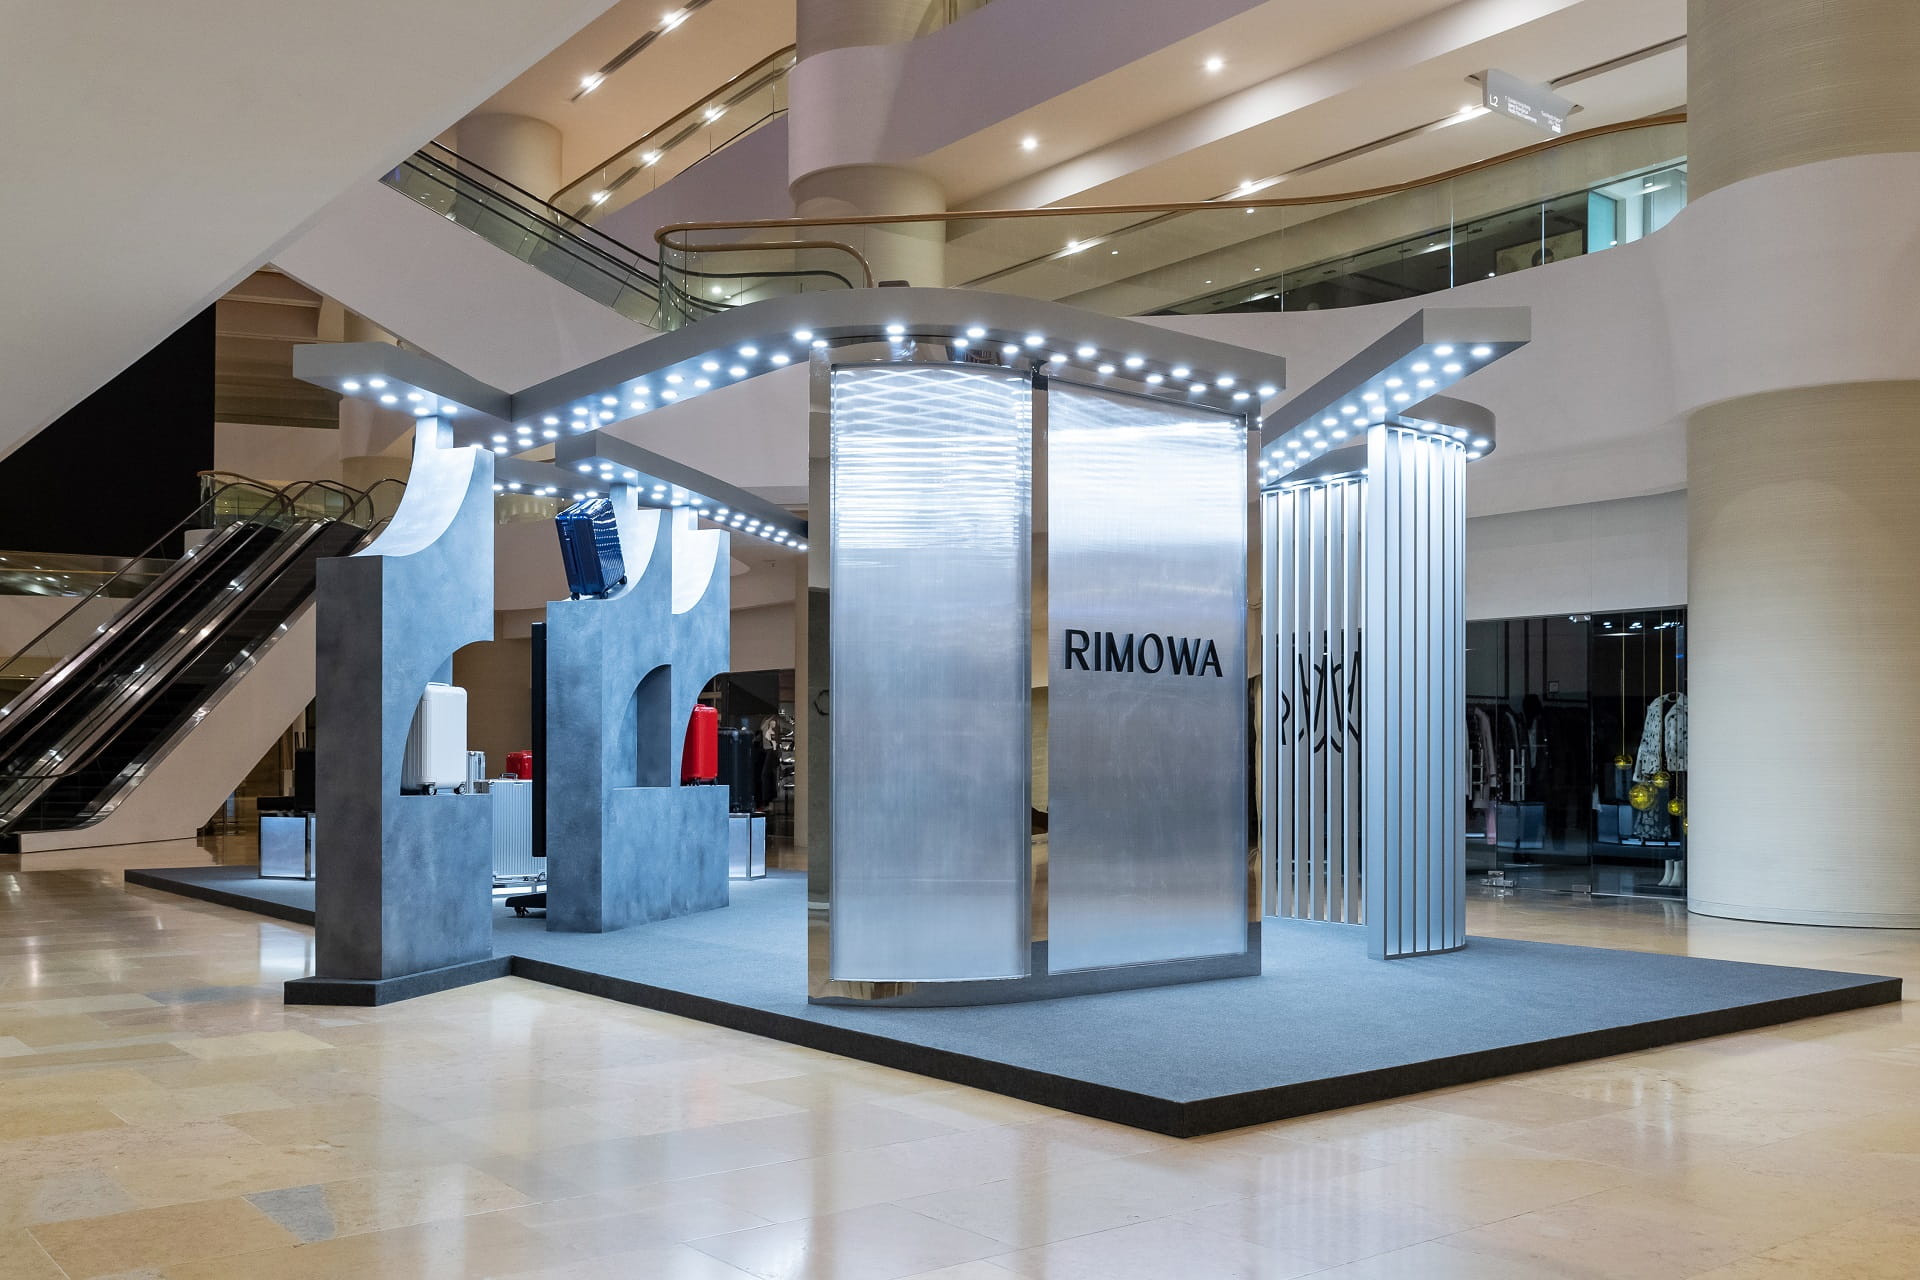 Shoppers can experience an exclusive interactive showcase at RIMOWA’s Pacific Place store to celebrate the brand’s 120th anniversary